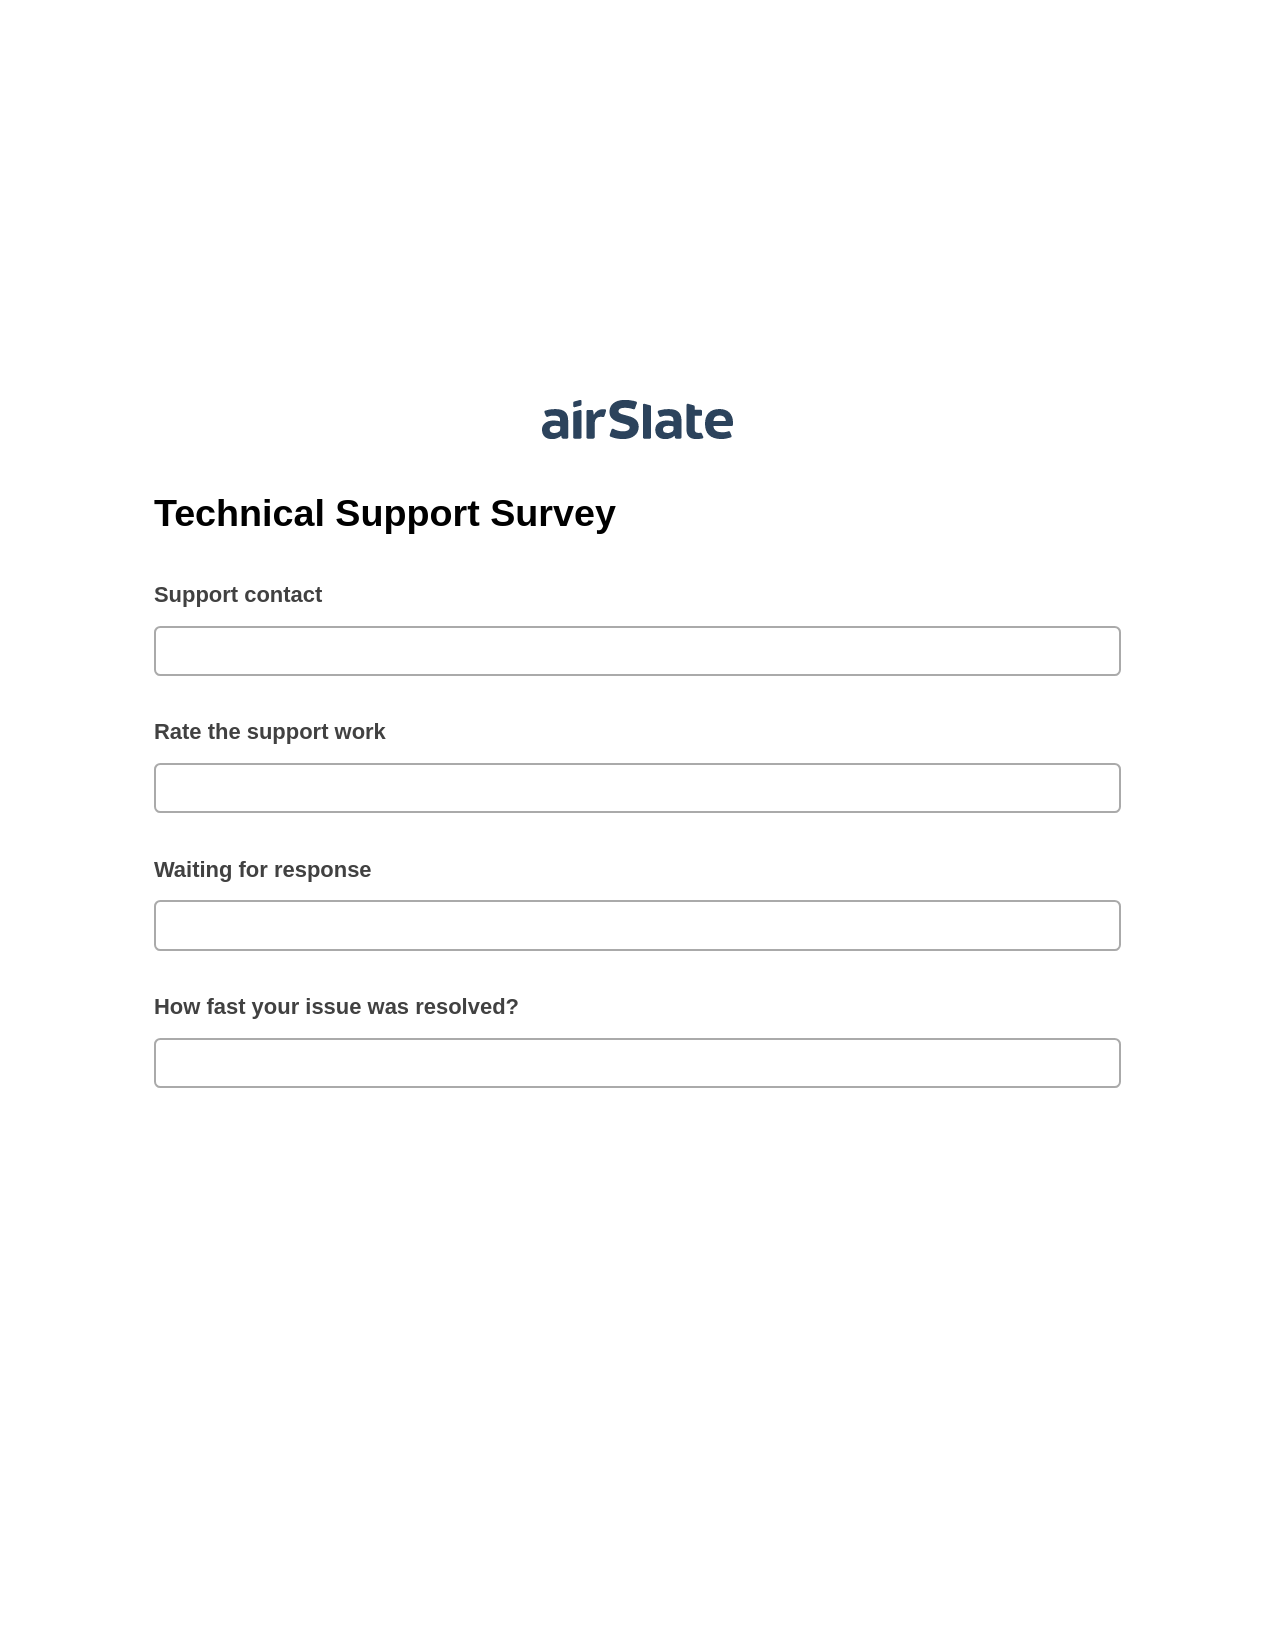 Technical Support Survey Pre-fill Dropdowns from CSV file Bot, Add Tags to Slate Bot, Export to Excel 365 Bot